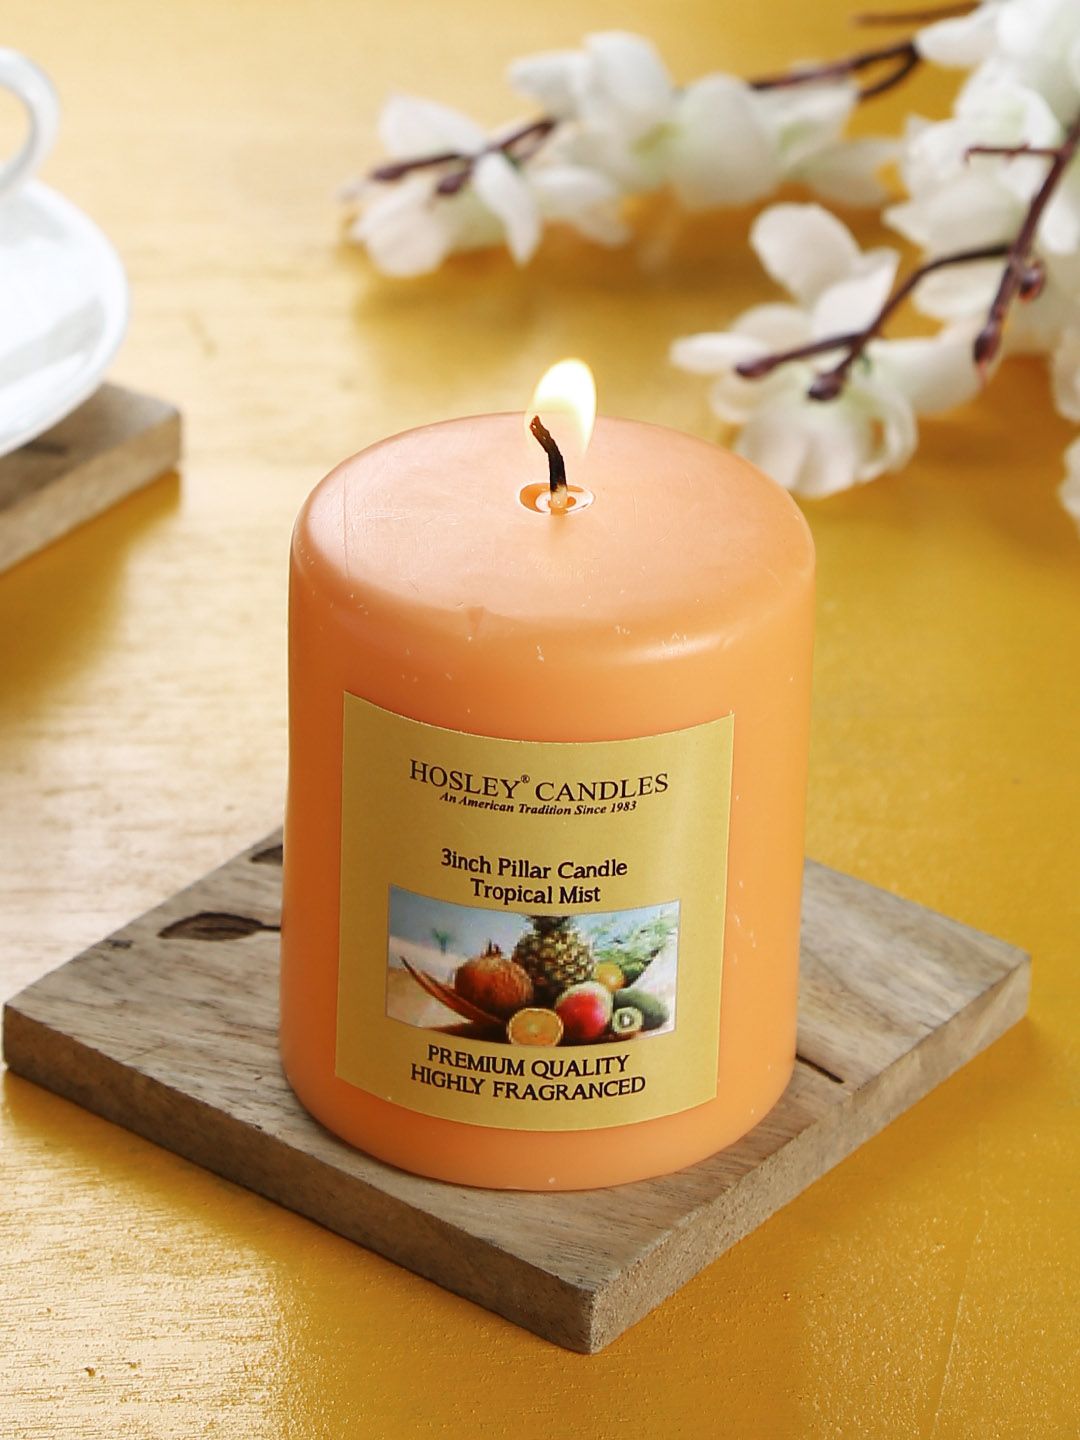 HOSLEY Orange Tropical Mist Highly Fragranced 3inch Pillar Candle Price in India